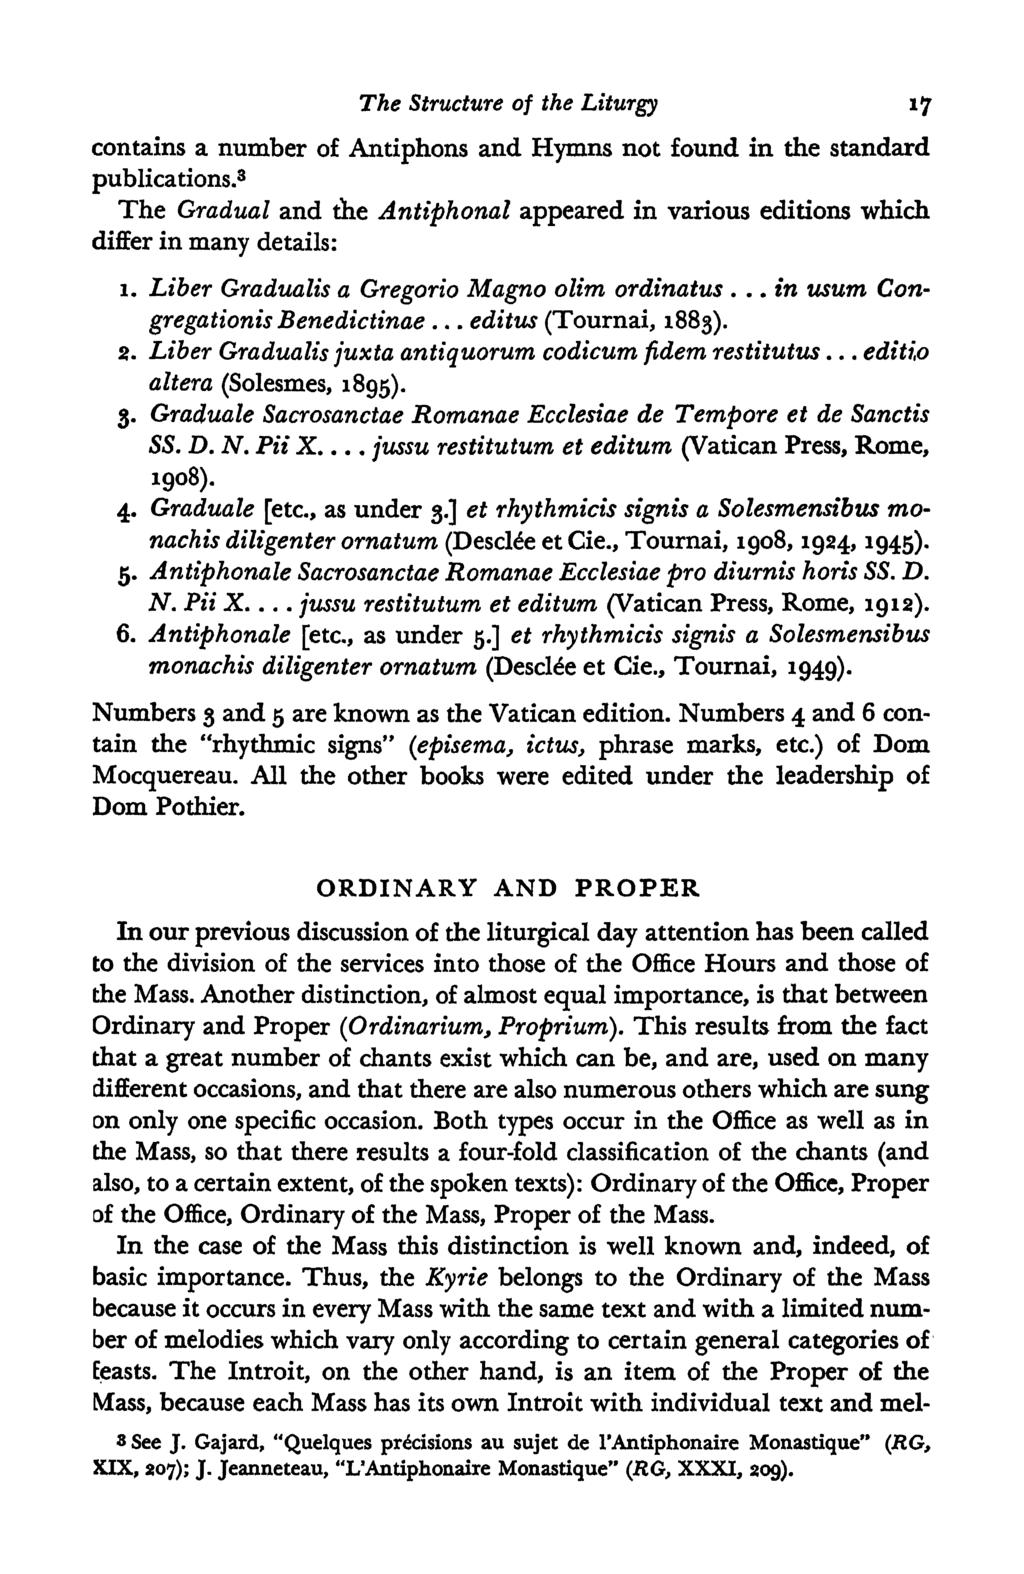 The Structure of the Liturgy 17 contains a number of Antiphons and Hymns not found in the standard publications.